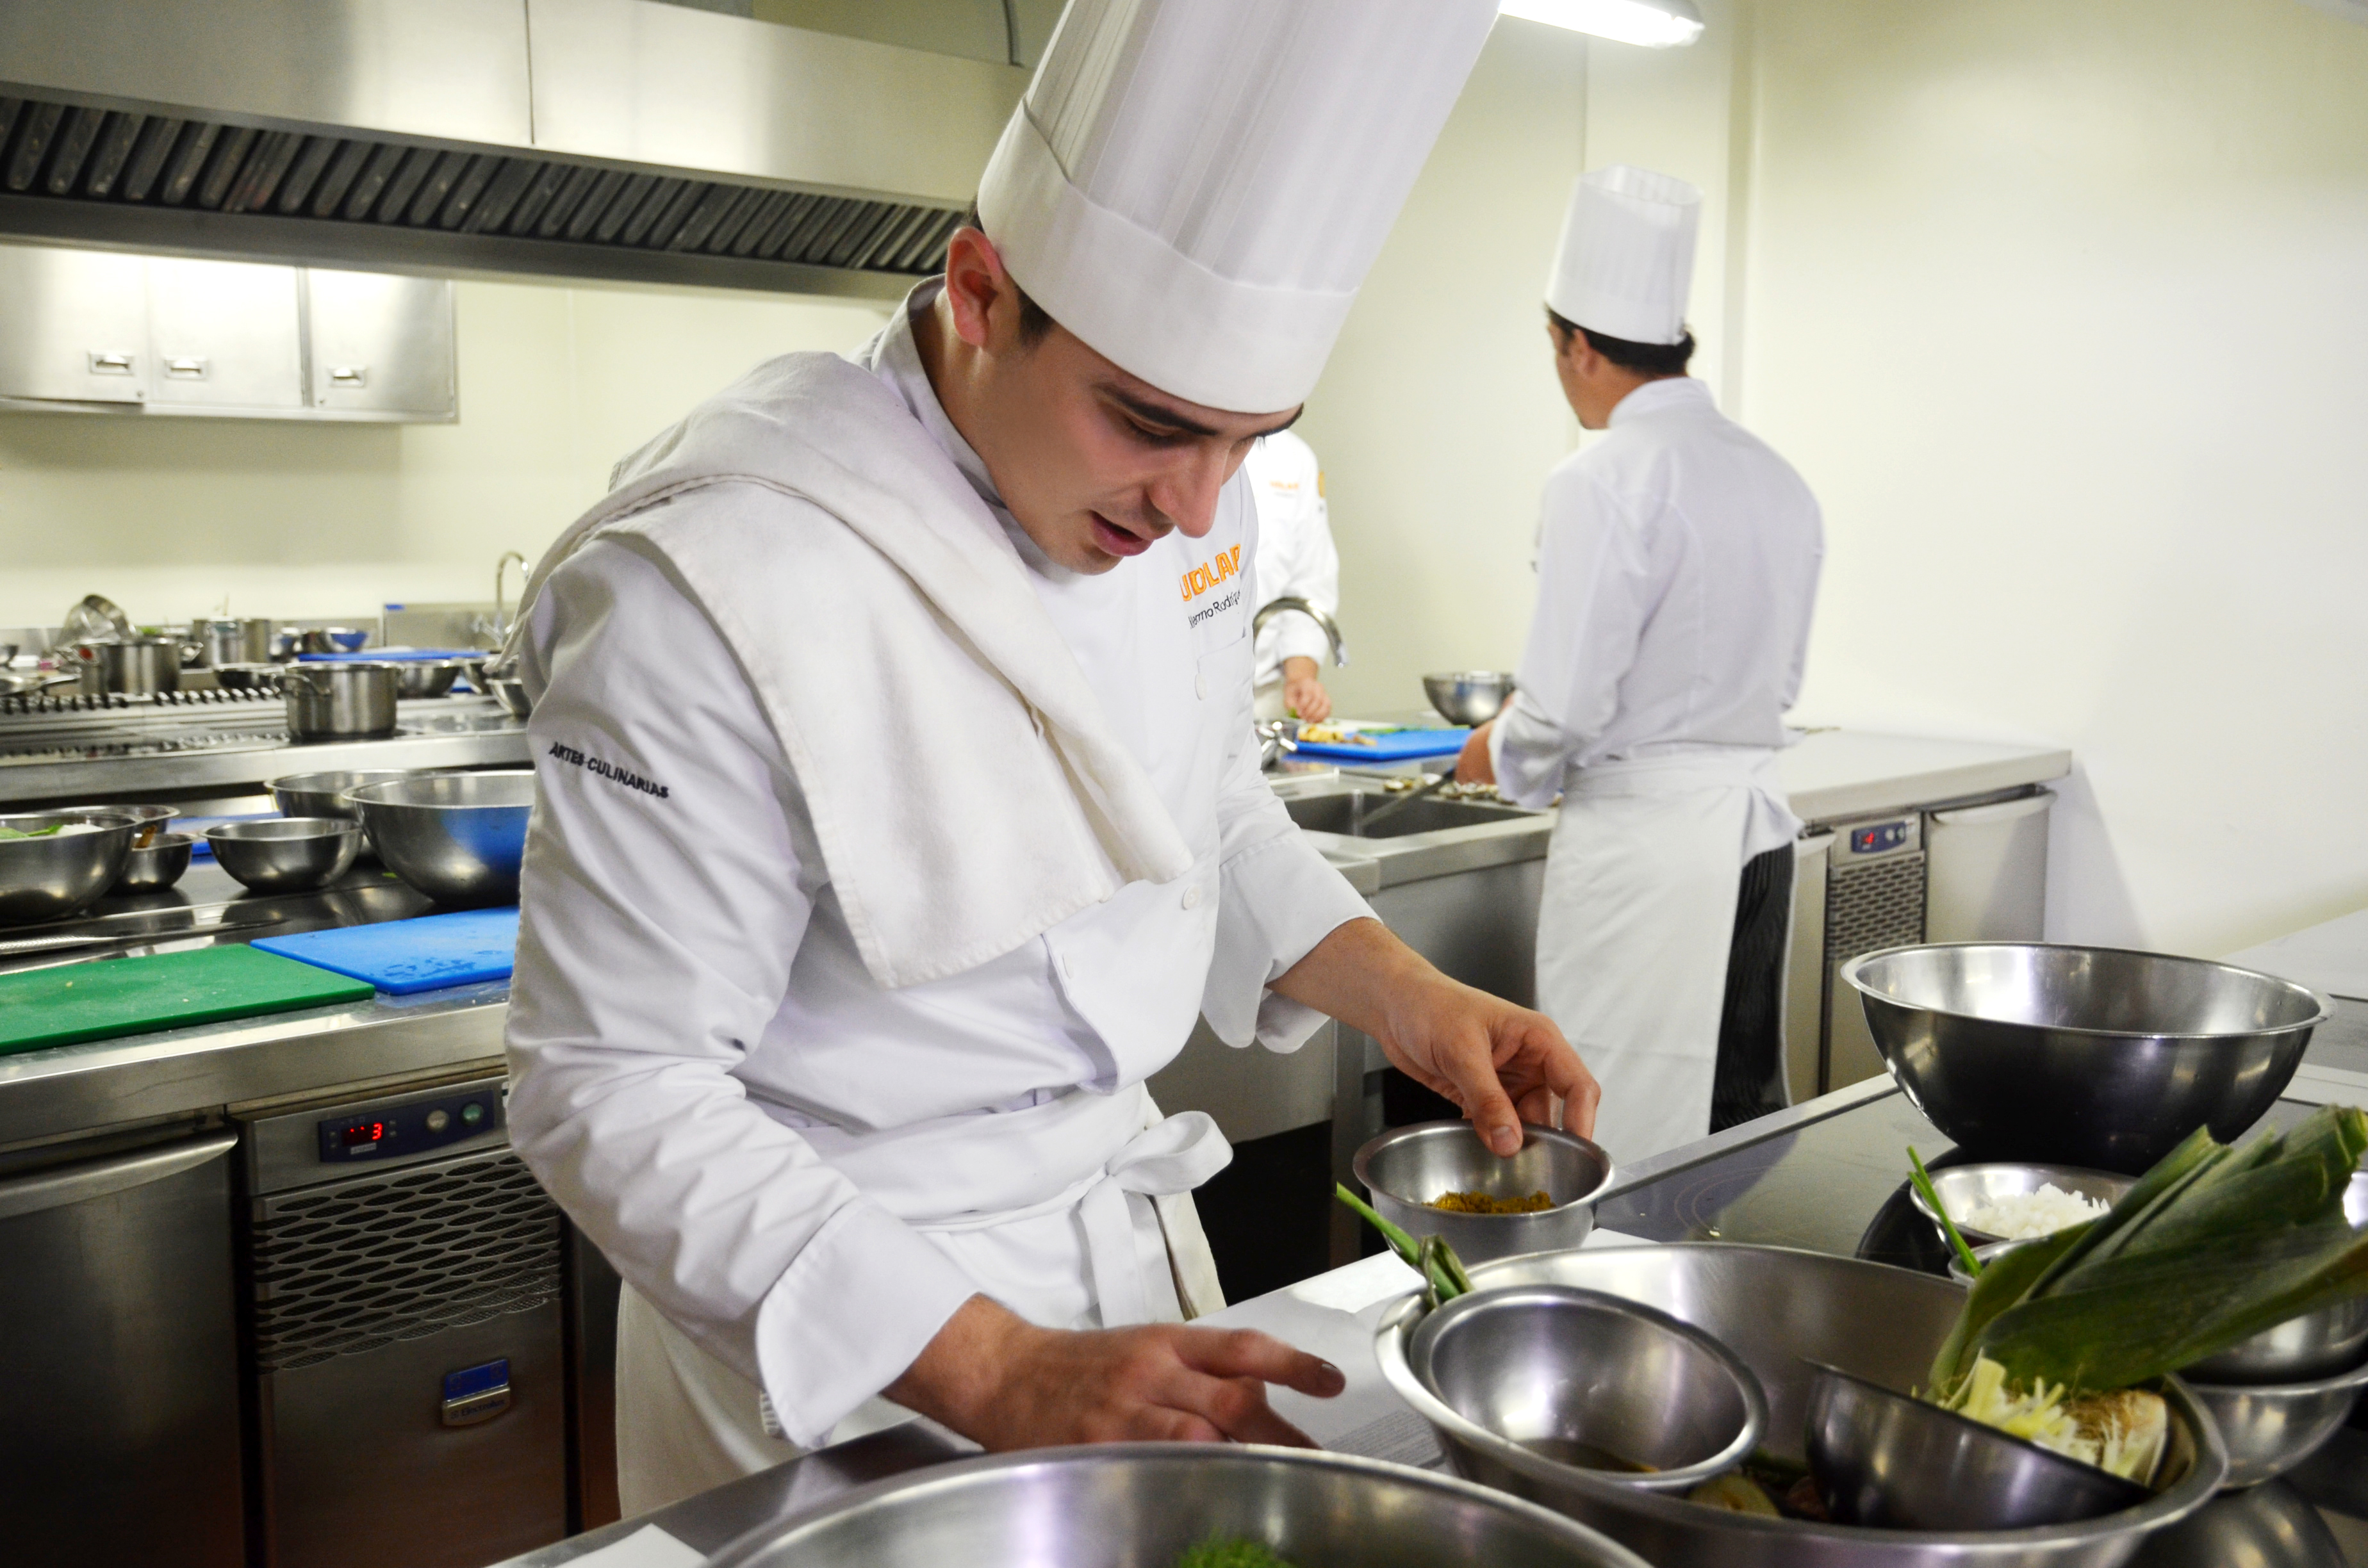 Catering management jobs in london